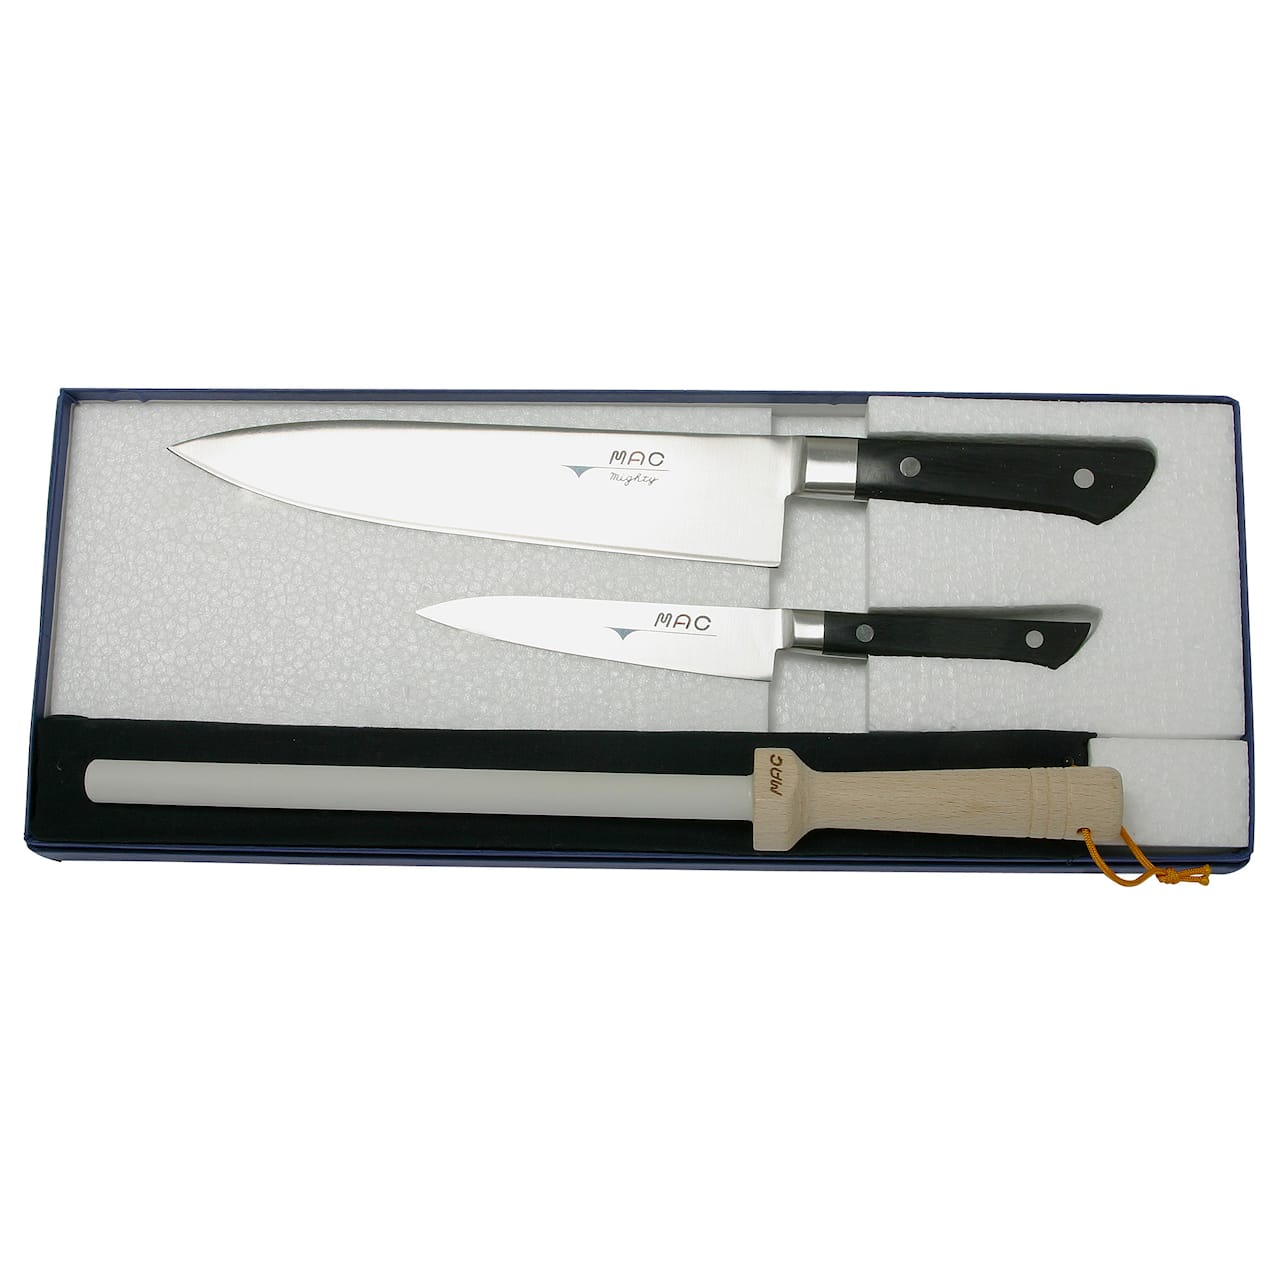 Mighty - Knife set, 3 parts